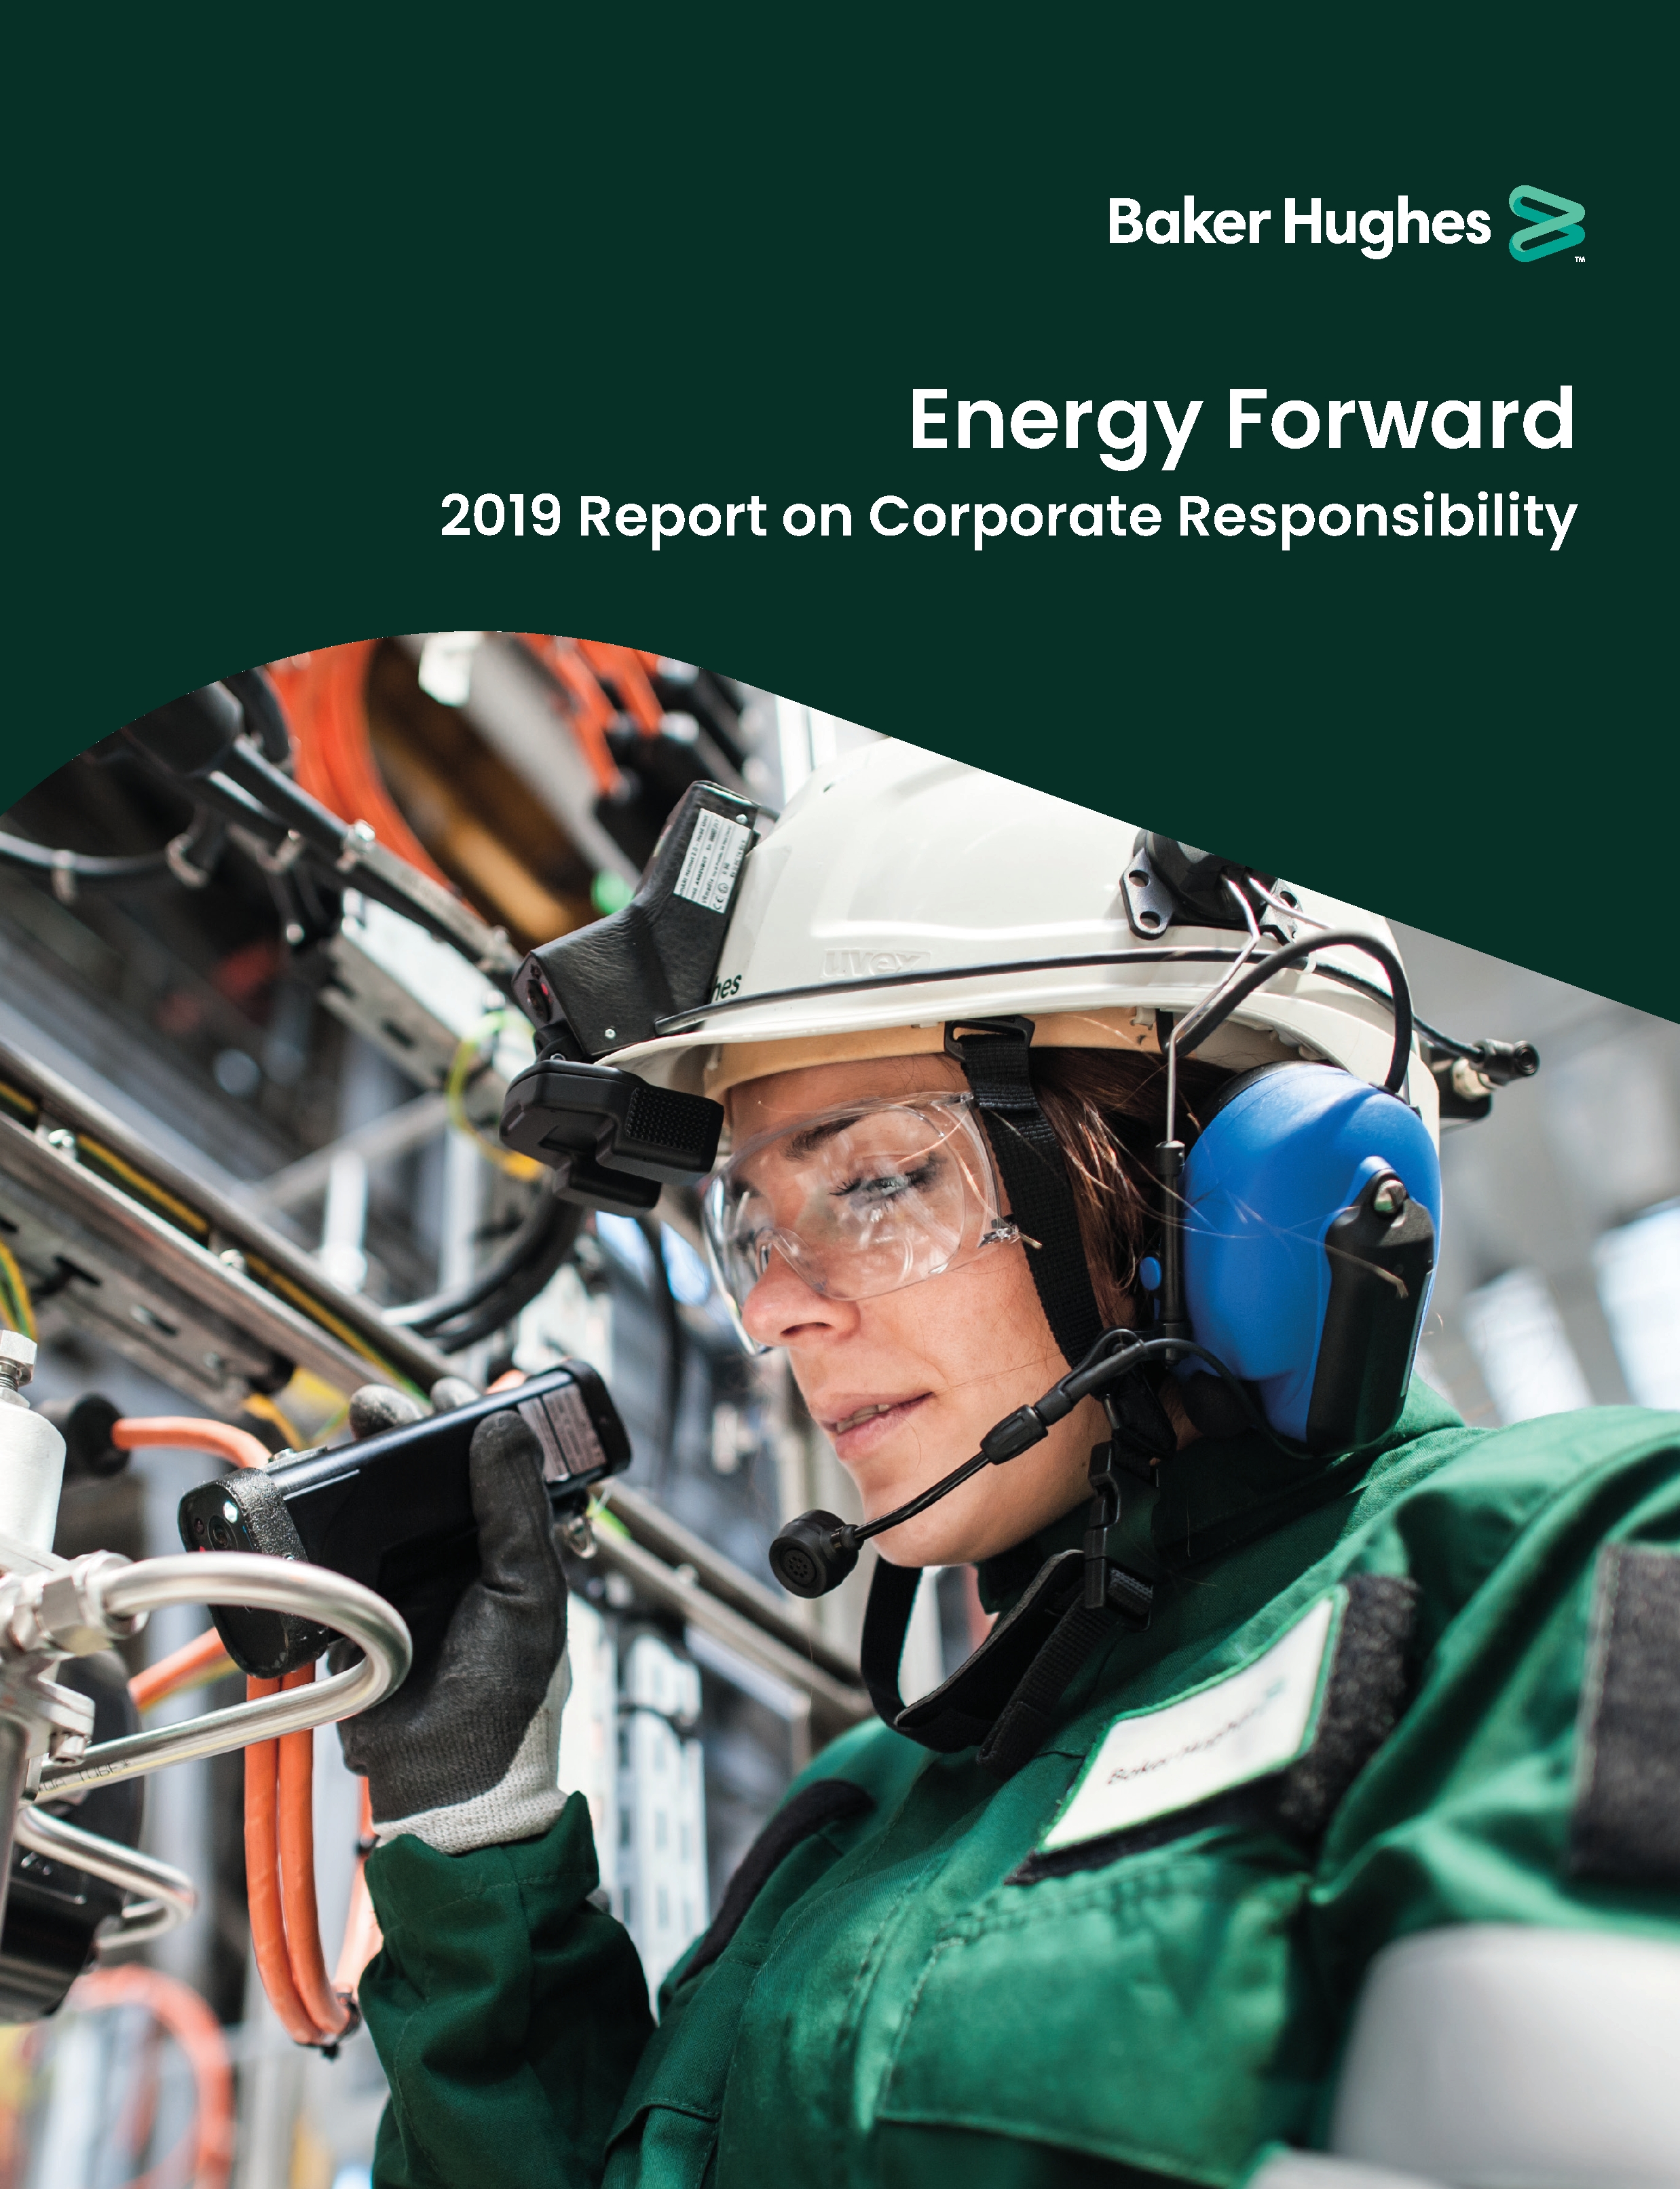 Baker Hughes released its “Energy Forward: 2019 Report on Corporate Responsibility” in August 2020.